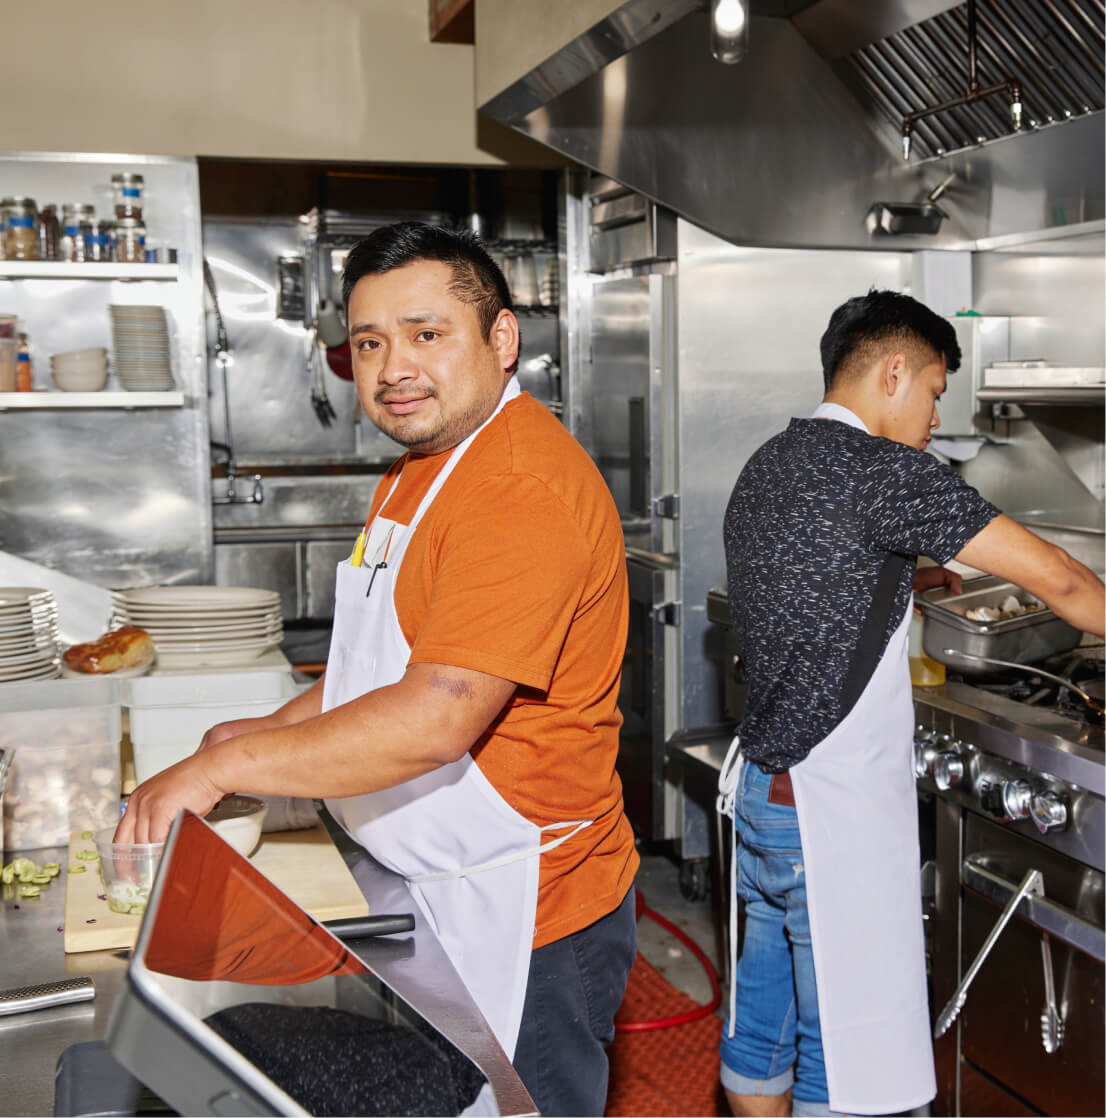 Restaurant insurance in California tailored for your business